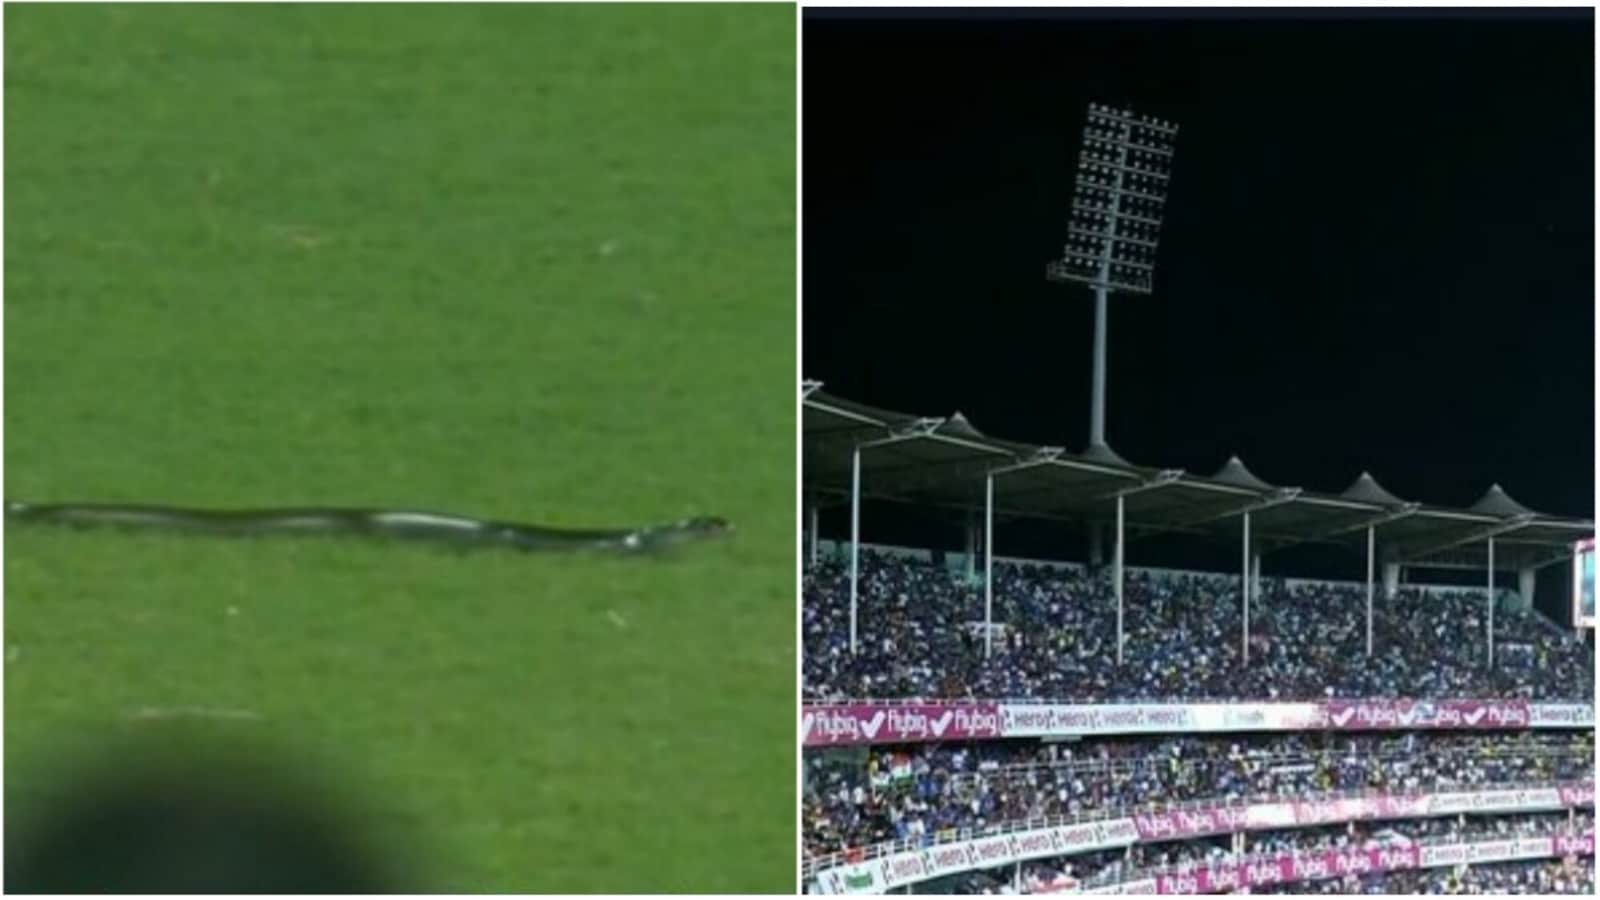 first-snake-stopped-play-then-floodlight-really-poor-twitter-tears-into-bcci-over-unusual-interruptions-in-2nd-t20i